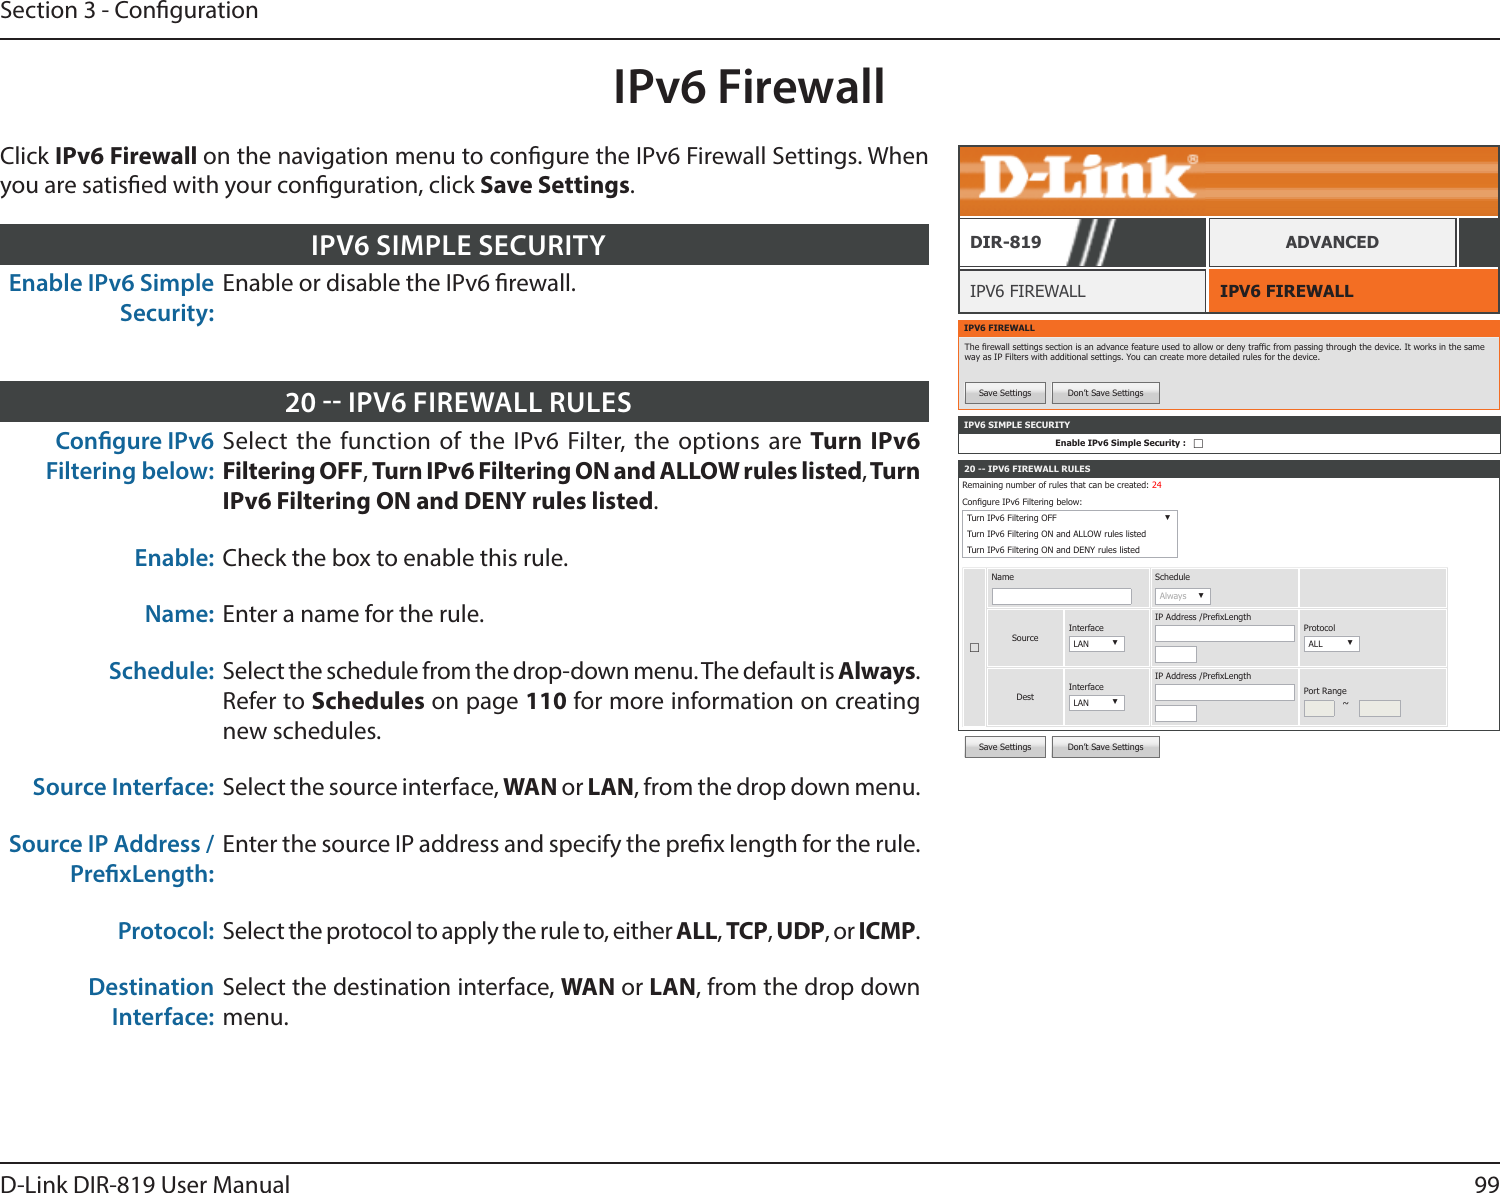 99D-Link DIR-819 User ManualSection 3 - CongurationSave Settings Don’t Save SettingsIPv6 FirewallIPV6 FIREWALLIPV6 FIREWALLDIR-819 ADVANCEDClick IPv6 Firewall on the navigation menu to congure the IPv6 Firewall Settings. When you are satised with your conguration, click Save Settings.Enable IPv6 Simple Security:Enable or disable the IPv6 rewall.IPV6 SIMPLE SECURITYCongure IPv6 Filtering below: Select the function of the IPv6 Filter, the options are Turn IPv6 Filtering OFF, Turn IPv6 Filtering ON and ALLOW rules listed, Turn IPv6 Filtering ON and DENY rules listed.Enable: Check the box to enable this rule.Name: Enter a name for the rule.Schedule: Select the schedule from the drop-down menu. The default is Always. Refer to Schedules on page 110 for more information on creating new schedules.Source Interface: Select the source interface, WAN or LAN, from the drop down menu.Source IP Address / PrexLength:Enter the source IP address and specify the prex length for the rule.Protocol: Select the protocol to apply the rule to, either ALL, TCP, UDP, or ICMP.Destination Interface:Select the destination interface, WAN or LAN, from the drop down menu.20  IPV6 FIREWALL RULESIPV6 FIREWALLThe rewall settings section is an advance feature used to allow or deny trafc from passing through the device. It works in the same way as IP Filters with additional settings. You can create more detailed rules for the device. Save Settings Don’t Save Settings20 -- IPV6 FIREWALL RULESRemaining number of rules that can be created: 24Congure IPv6 Filtering below: Turn IPv6 Filtering OFF ▼Turn IPv6 Filtering ON and ALLOW rules listedTurn IPv6 Filtering ON and DENY rules listed☐Name ScheduleAlways ▼SourceInterfaceLAN ▼IP Address /PrexLengthProtocolALL ▼DestInterfaceLAN ▼IP Address /PrexLengthPort Range~IPV6 SIMPLE SECURITYEnable IPv6 Simple Security : ☐